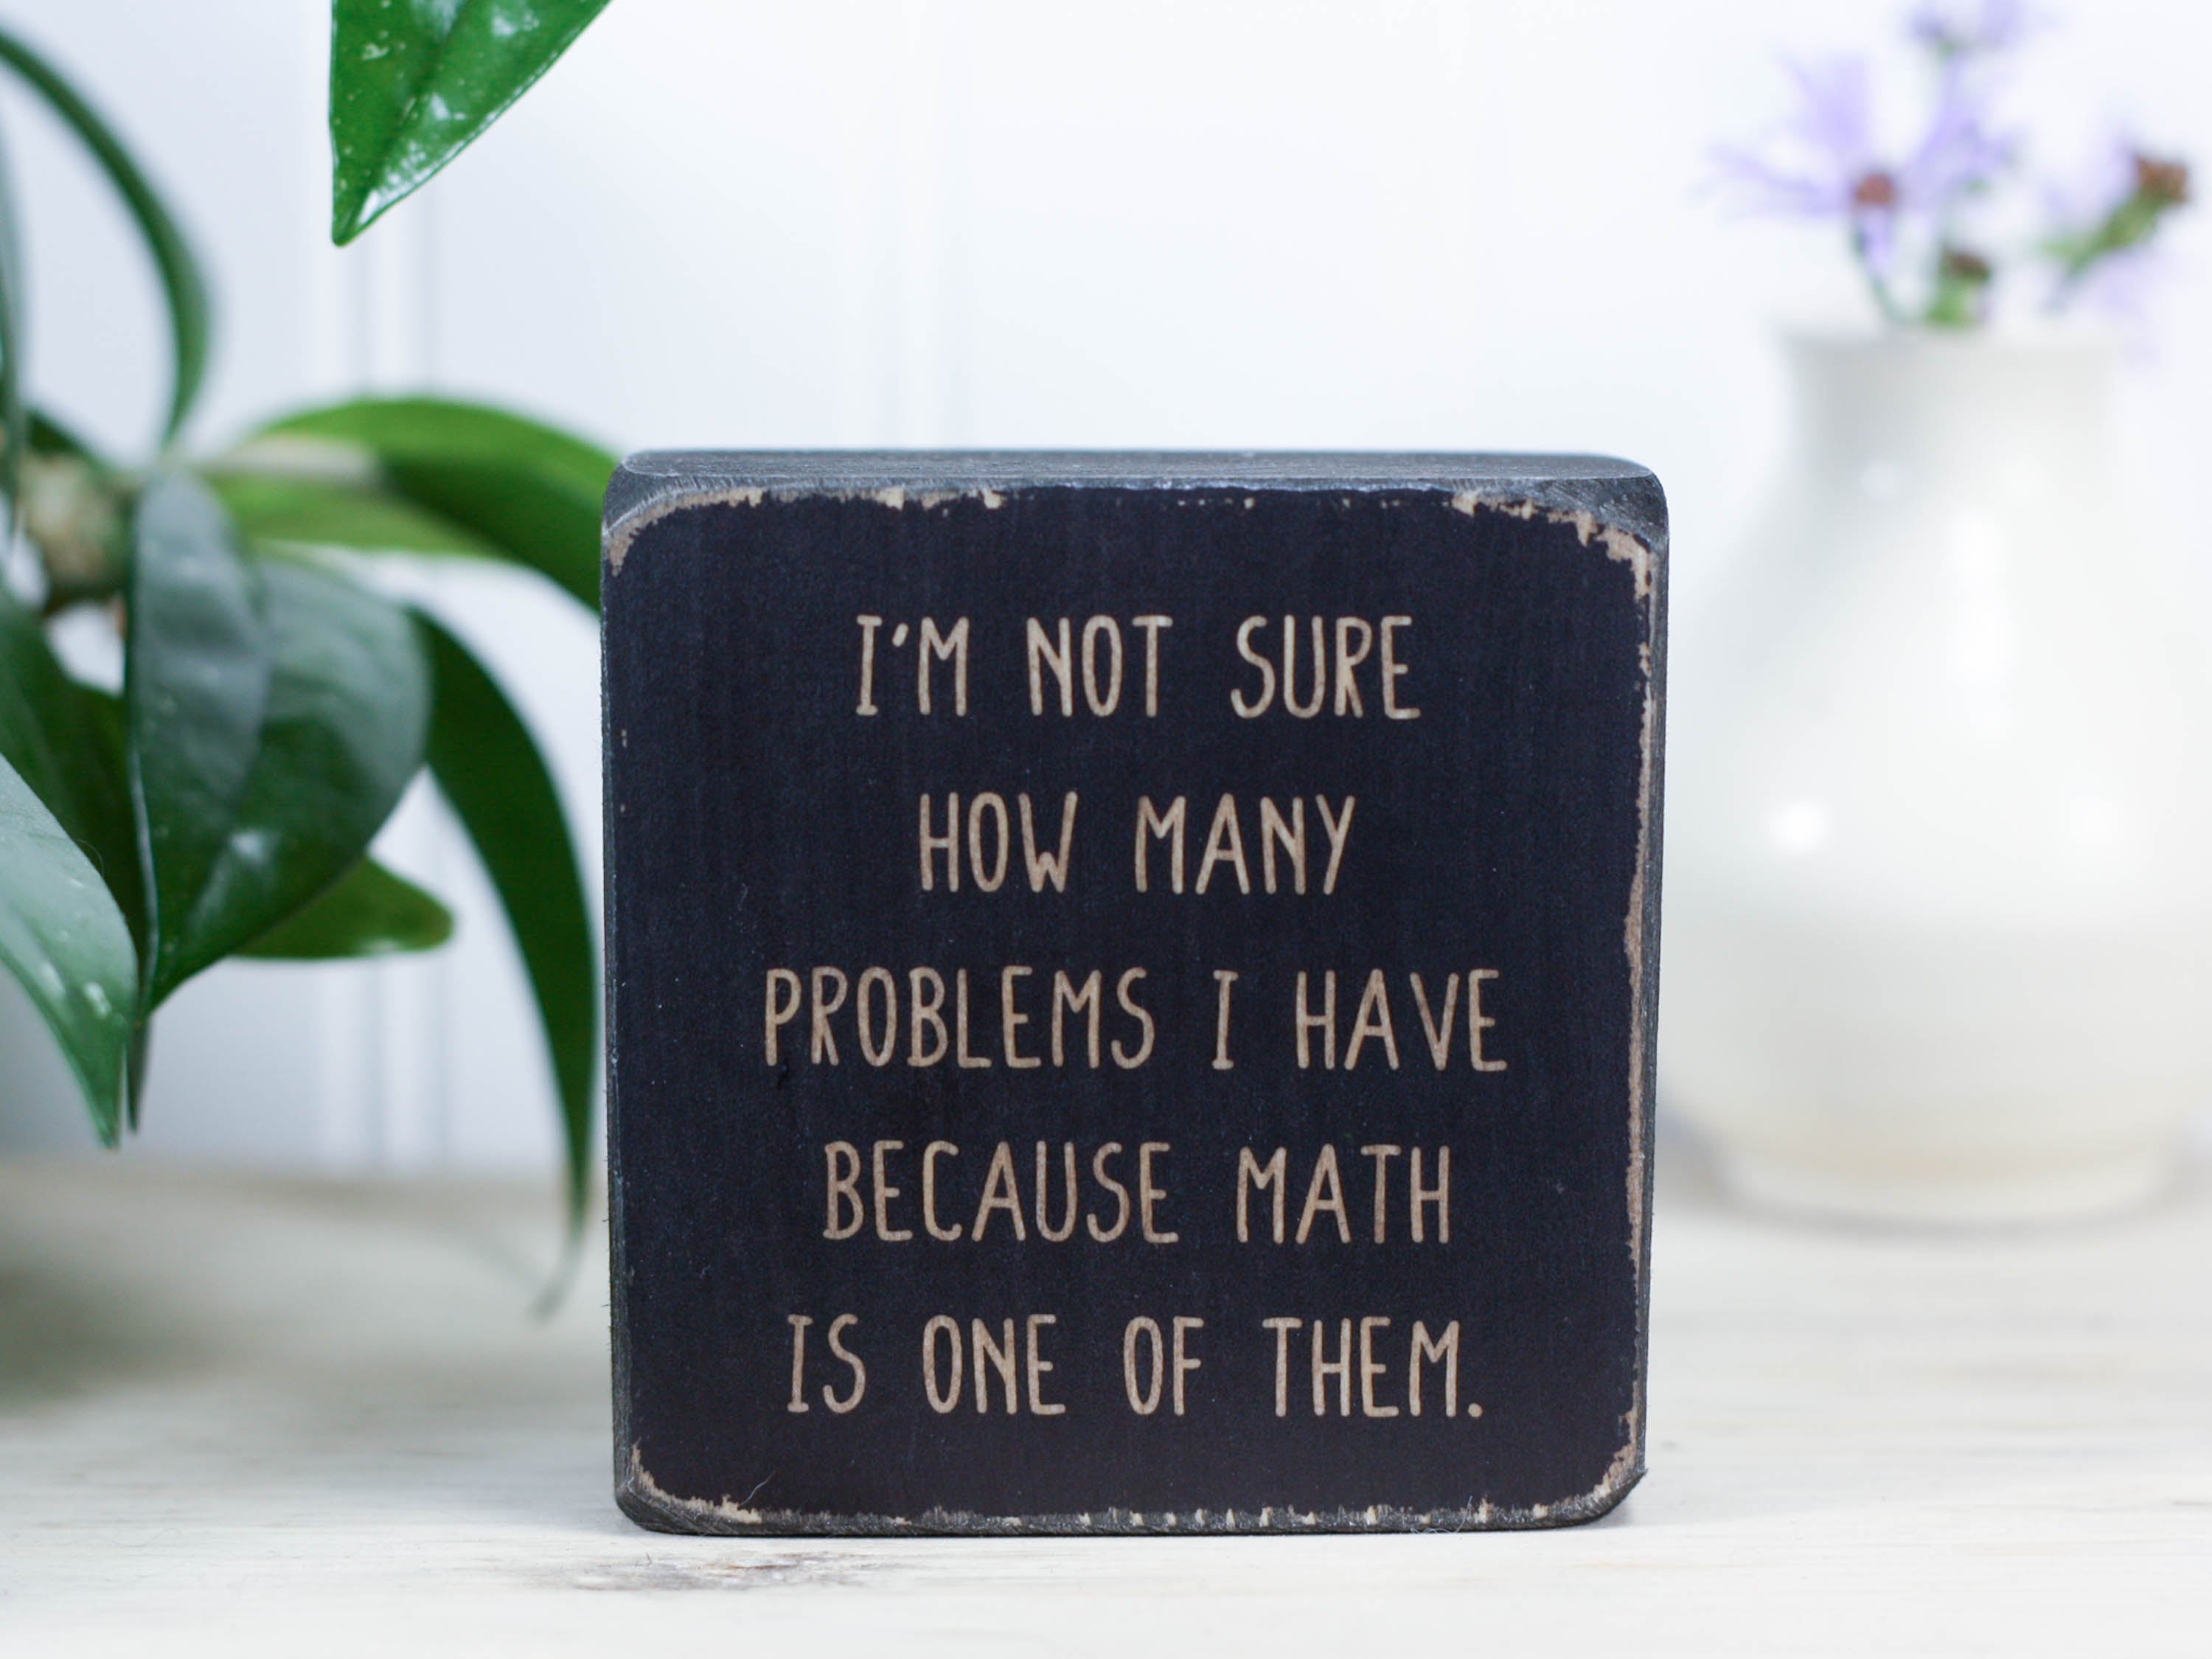 Mini wood sign in distressed black with the saying "I'm not sure how many problems I have because math is one of them."